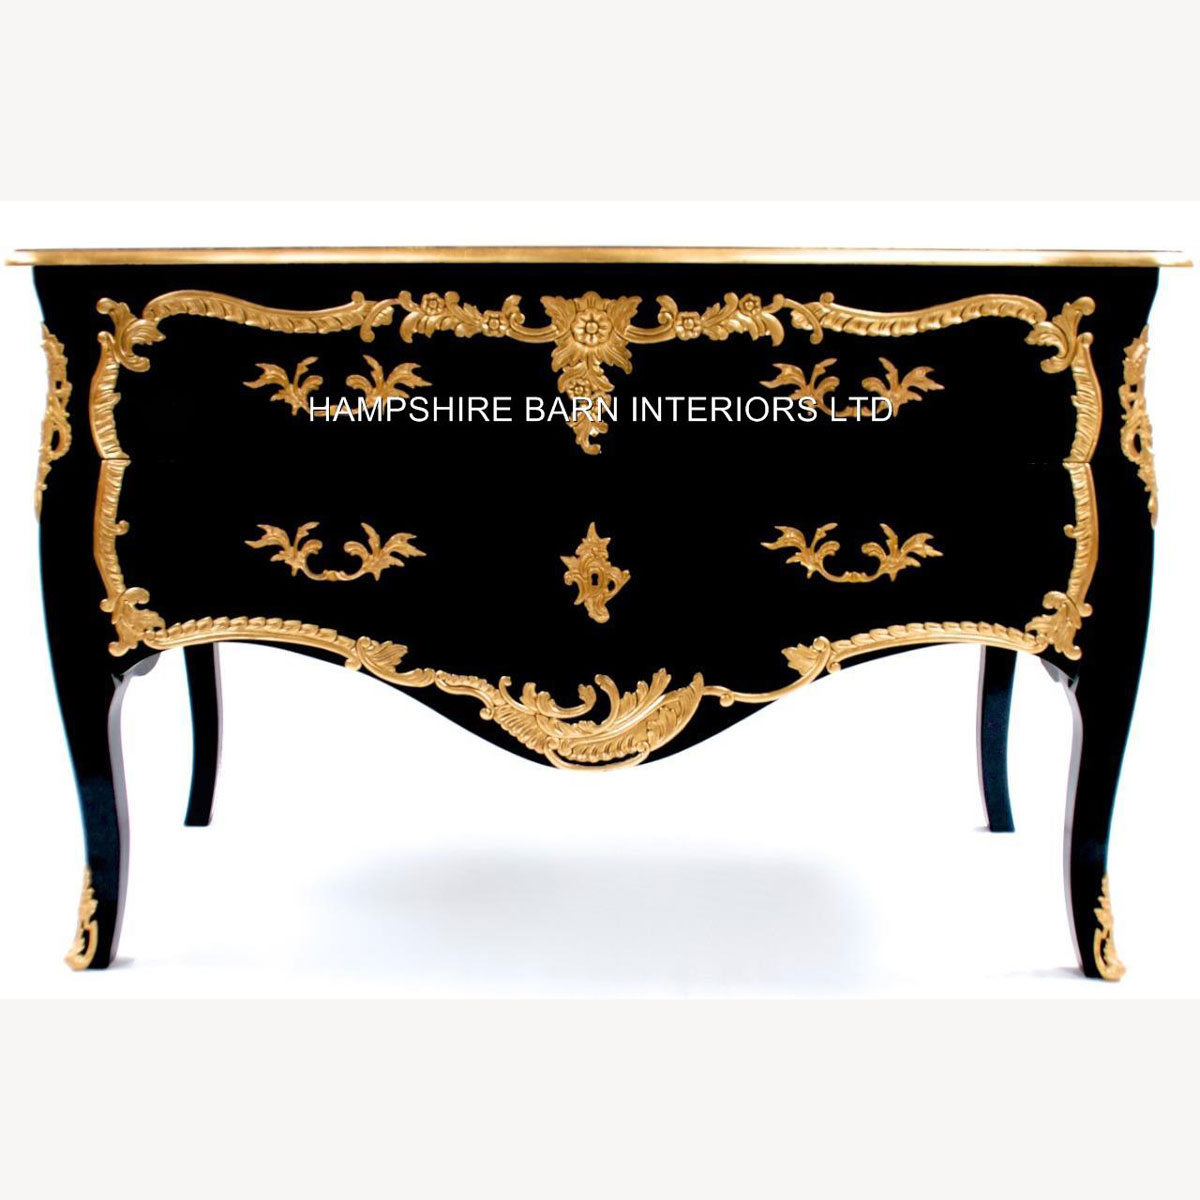 A Black Duboy 2 Drawer Chest Baroque Fabulous French Reproduction Louis Xvi Rococo Commode With Gold Or Silver 1 - Hampshire Barn Interiors - A Black Duboy 2 Drawer Chest Baroque Fabulous French Reproduction Louis Xvi Rococo Commode With Gold Or Silver -